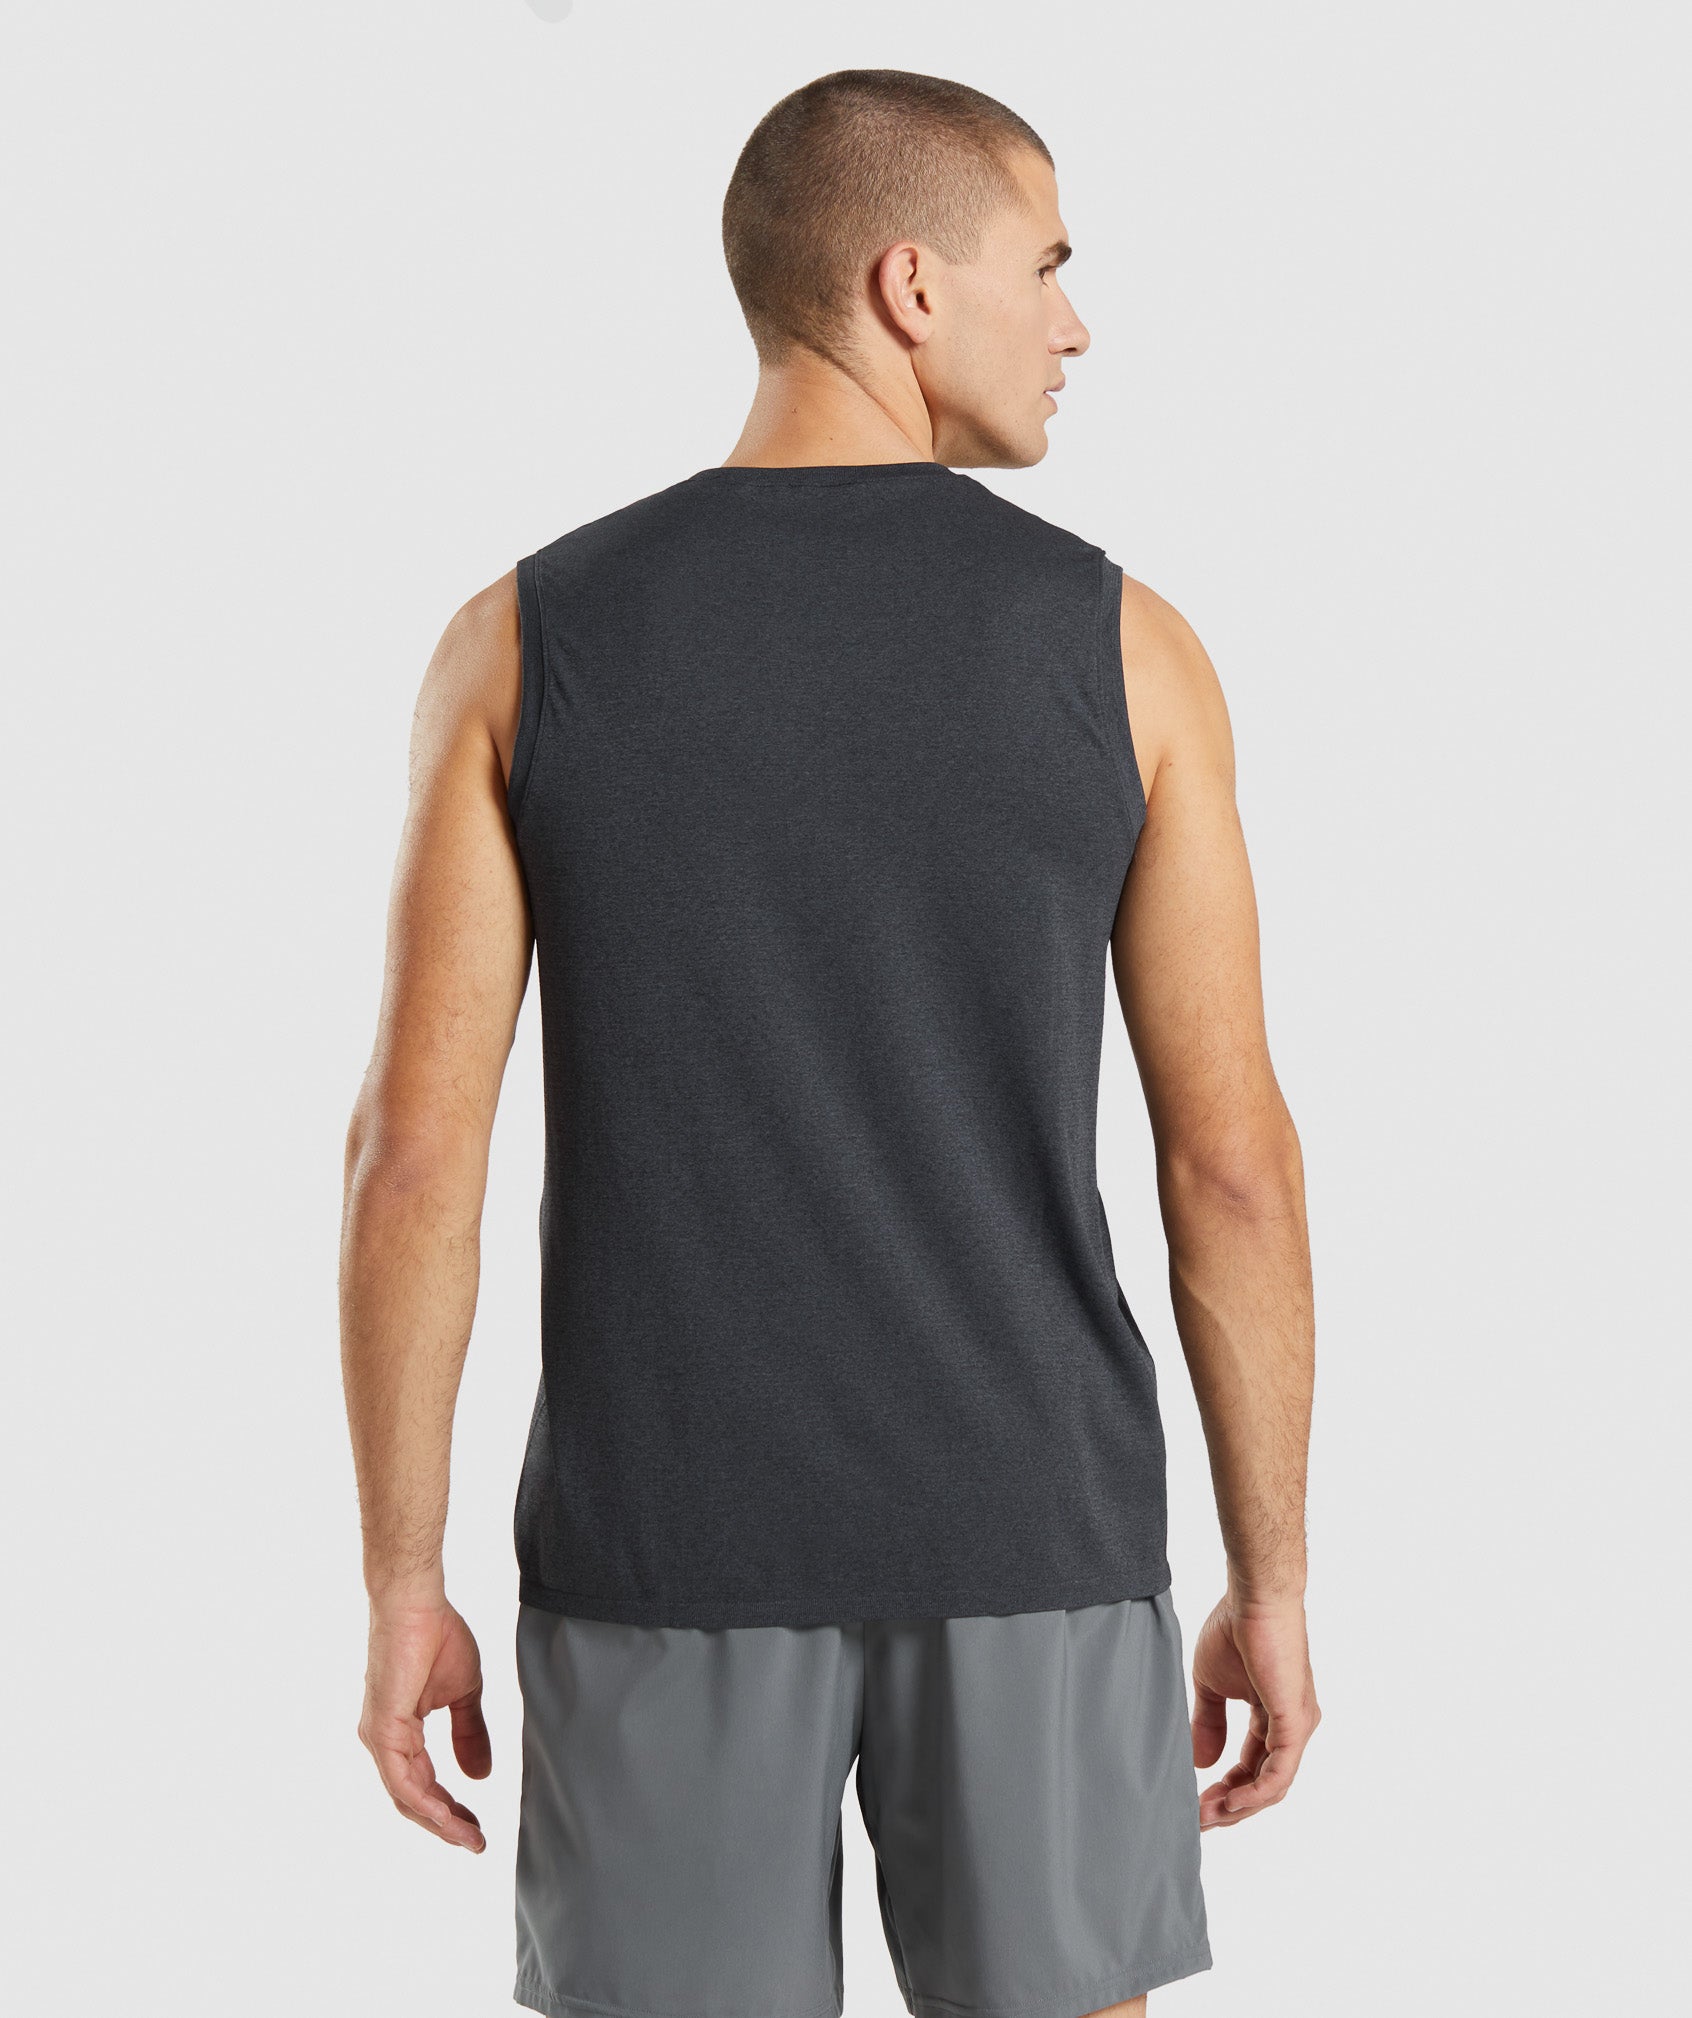 Arrival Seamless Tank in Black Marl - view 2